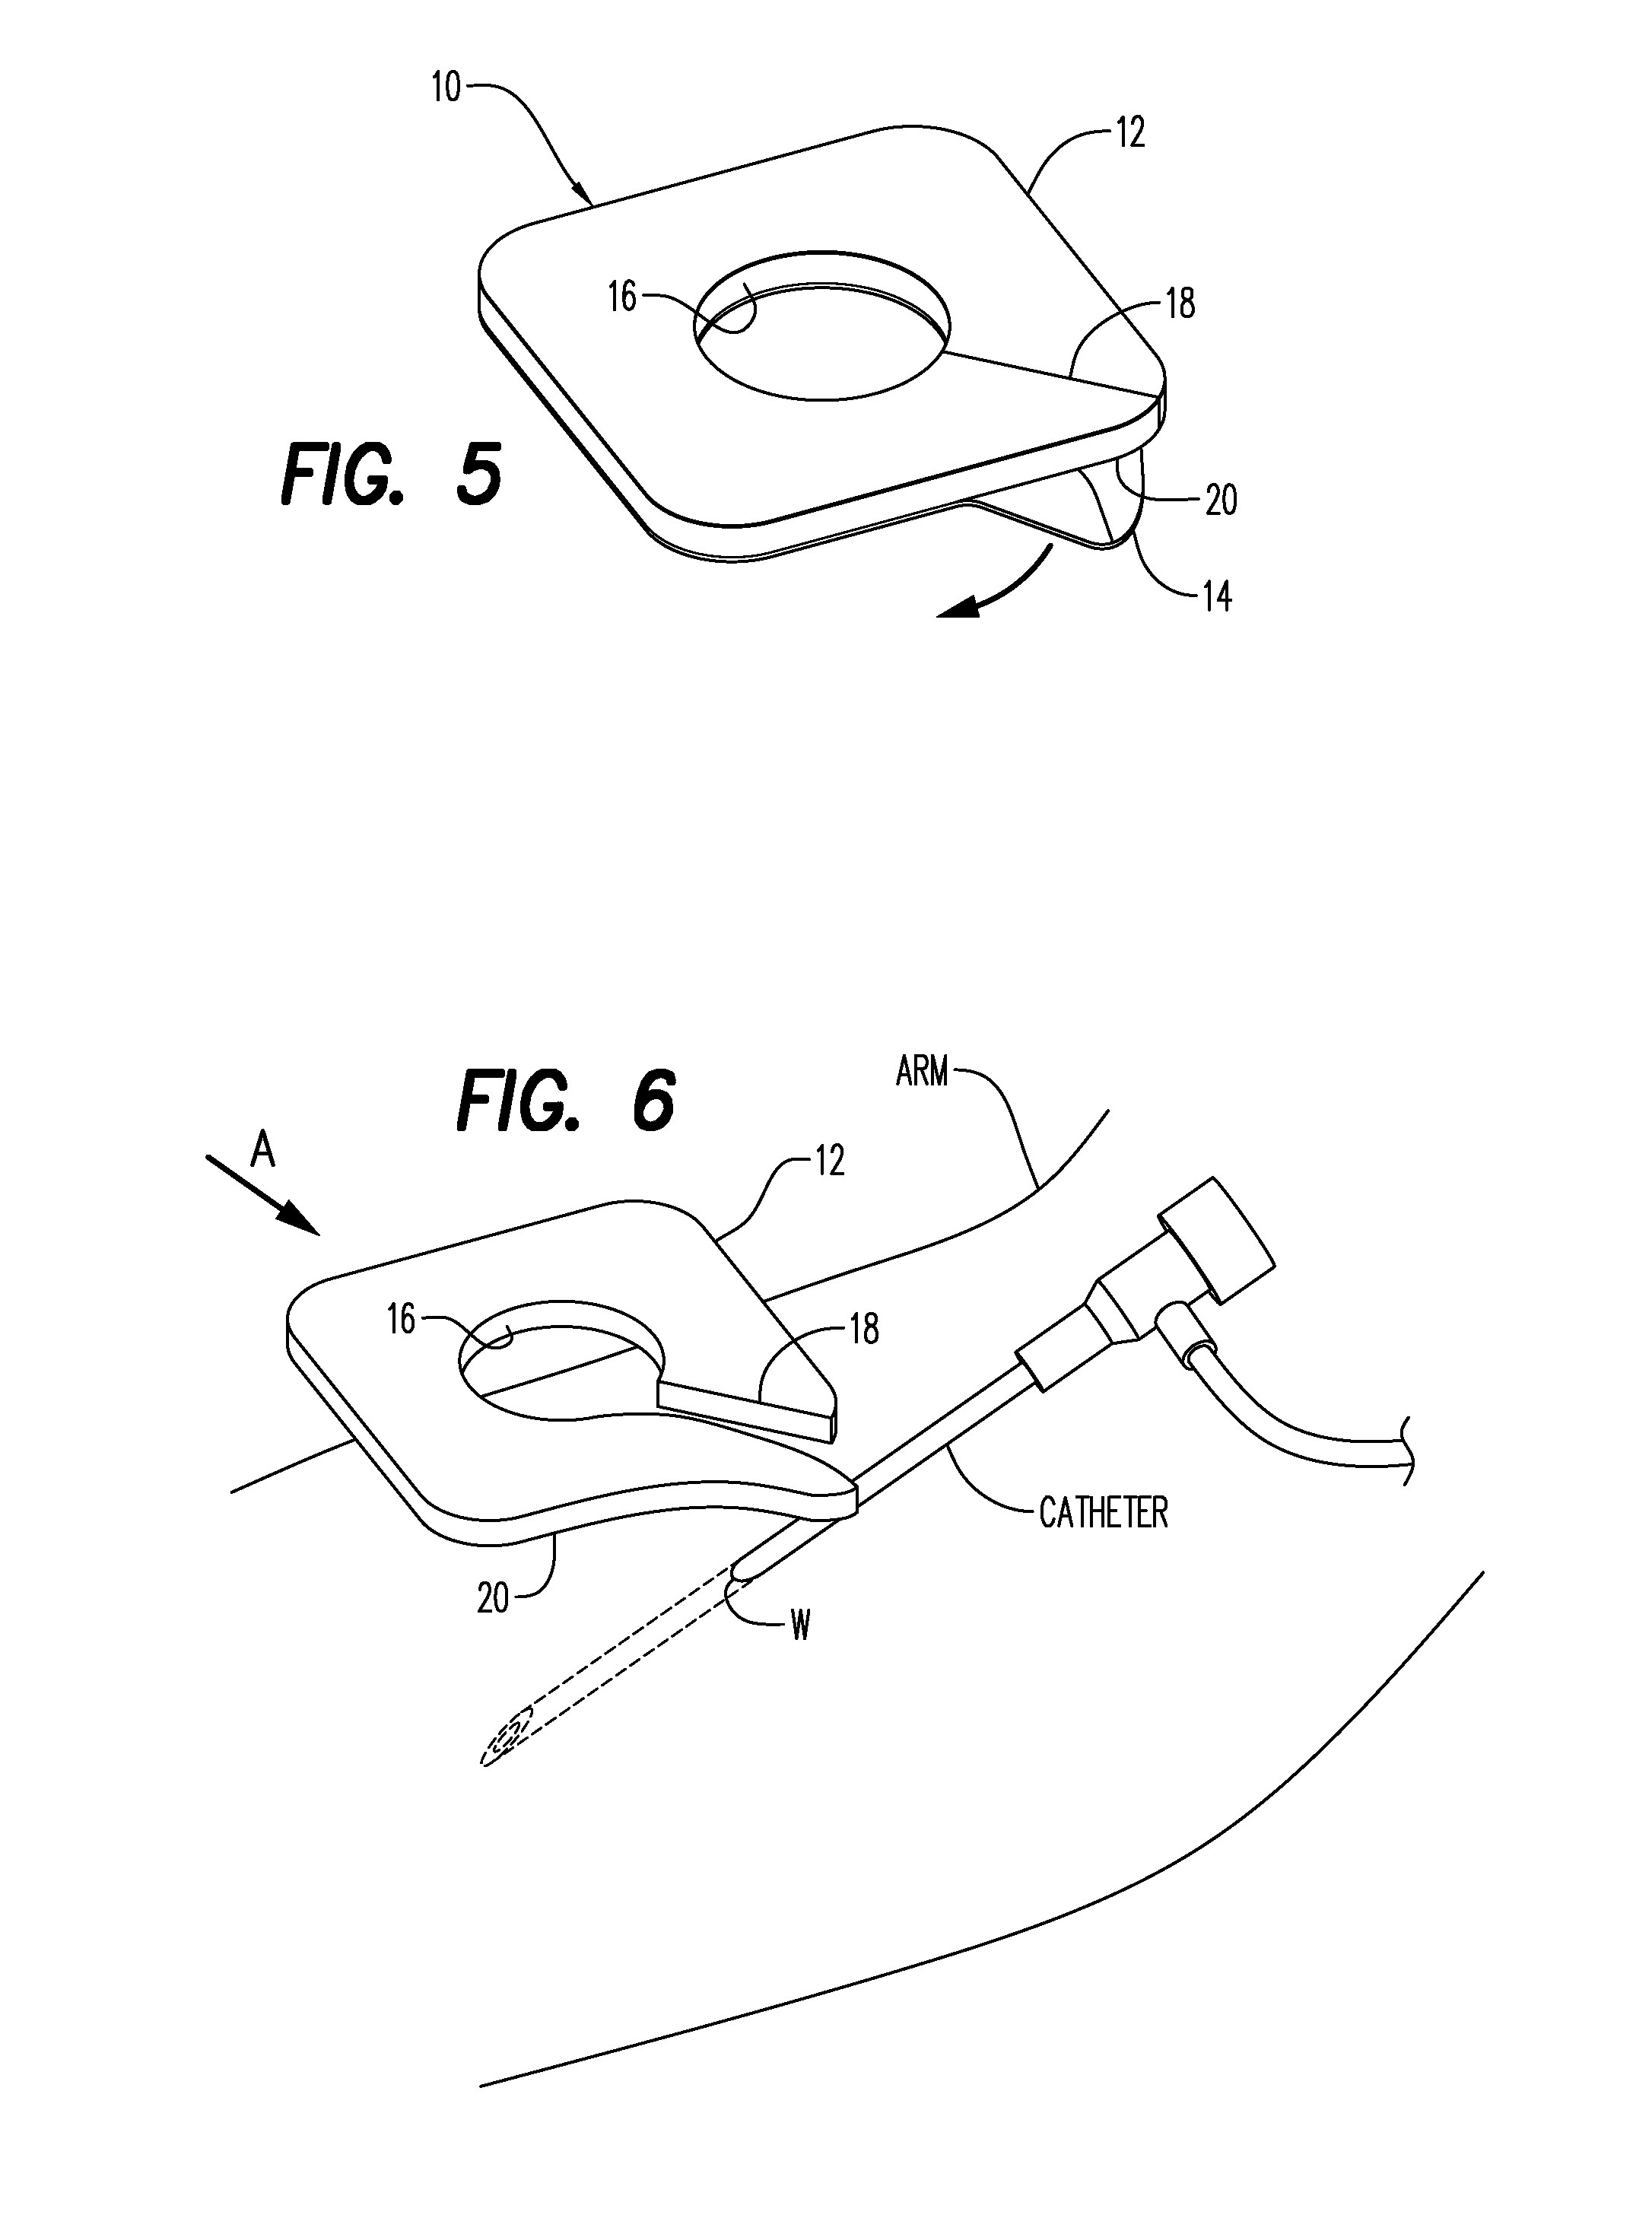 Method of Reducing Infections and/or Air Embolisms Associated with Vascular Access Procedures